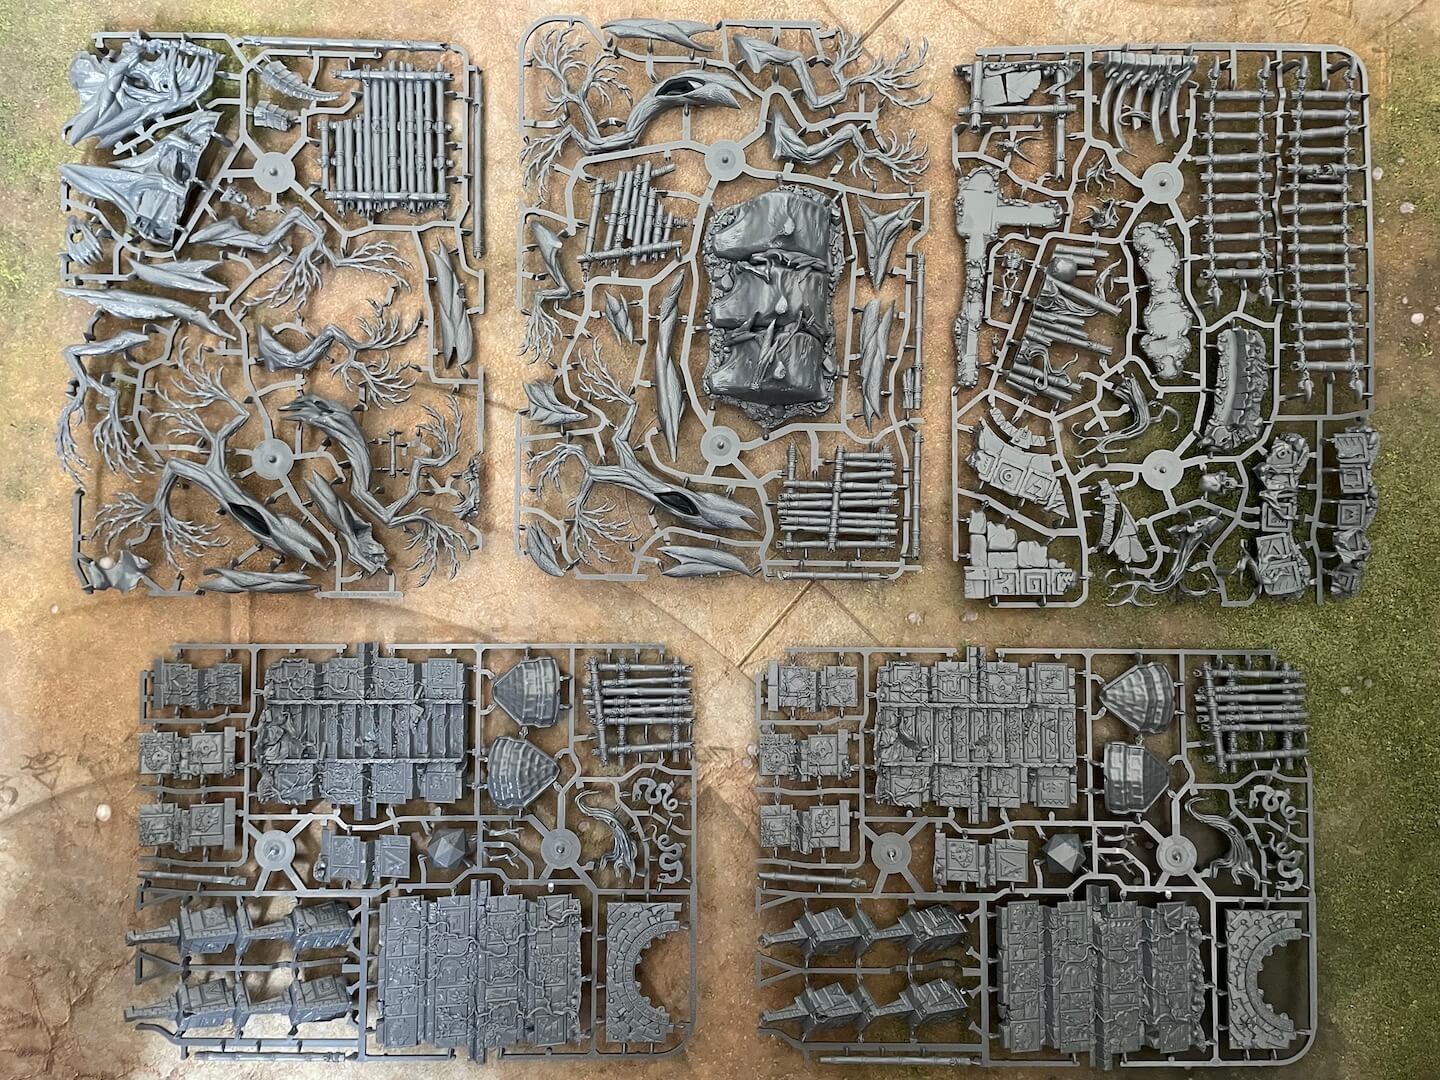 An image of the sprues for all the scenery included in Warcry Nightmare Quest